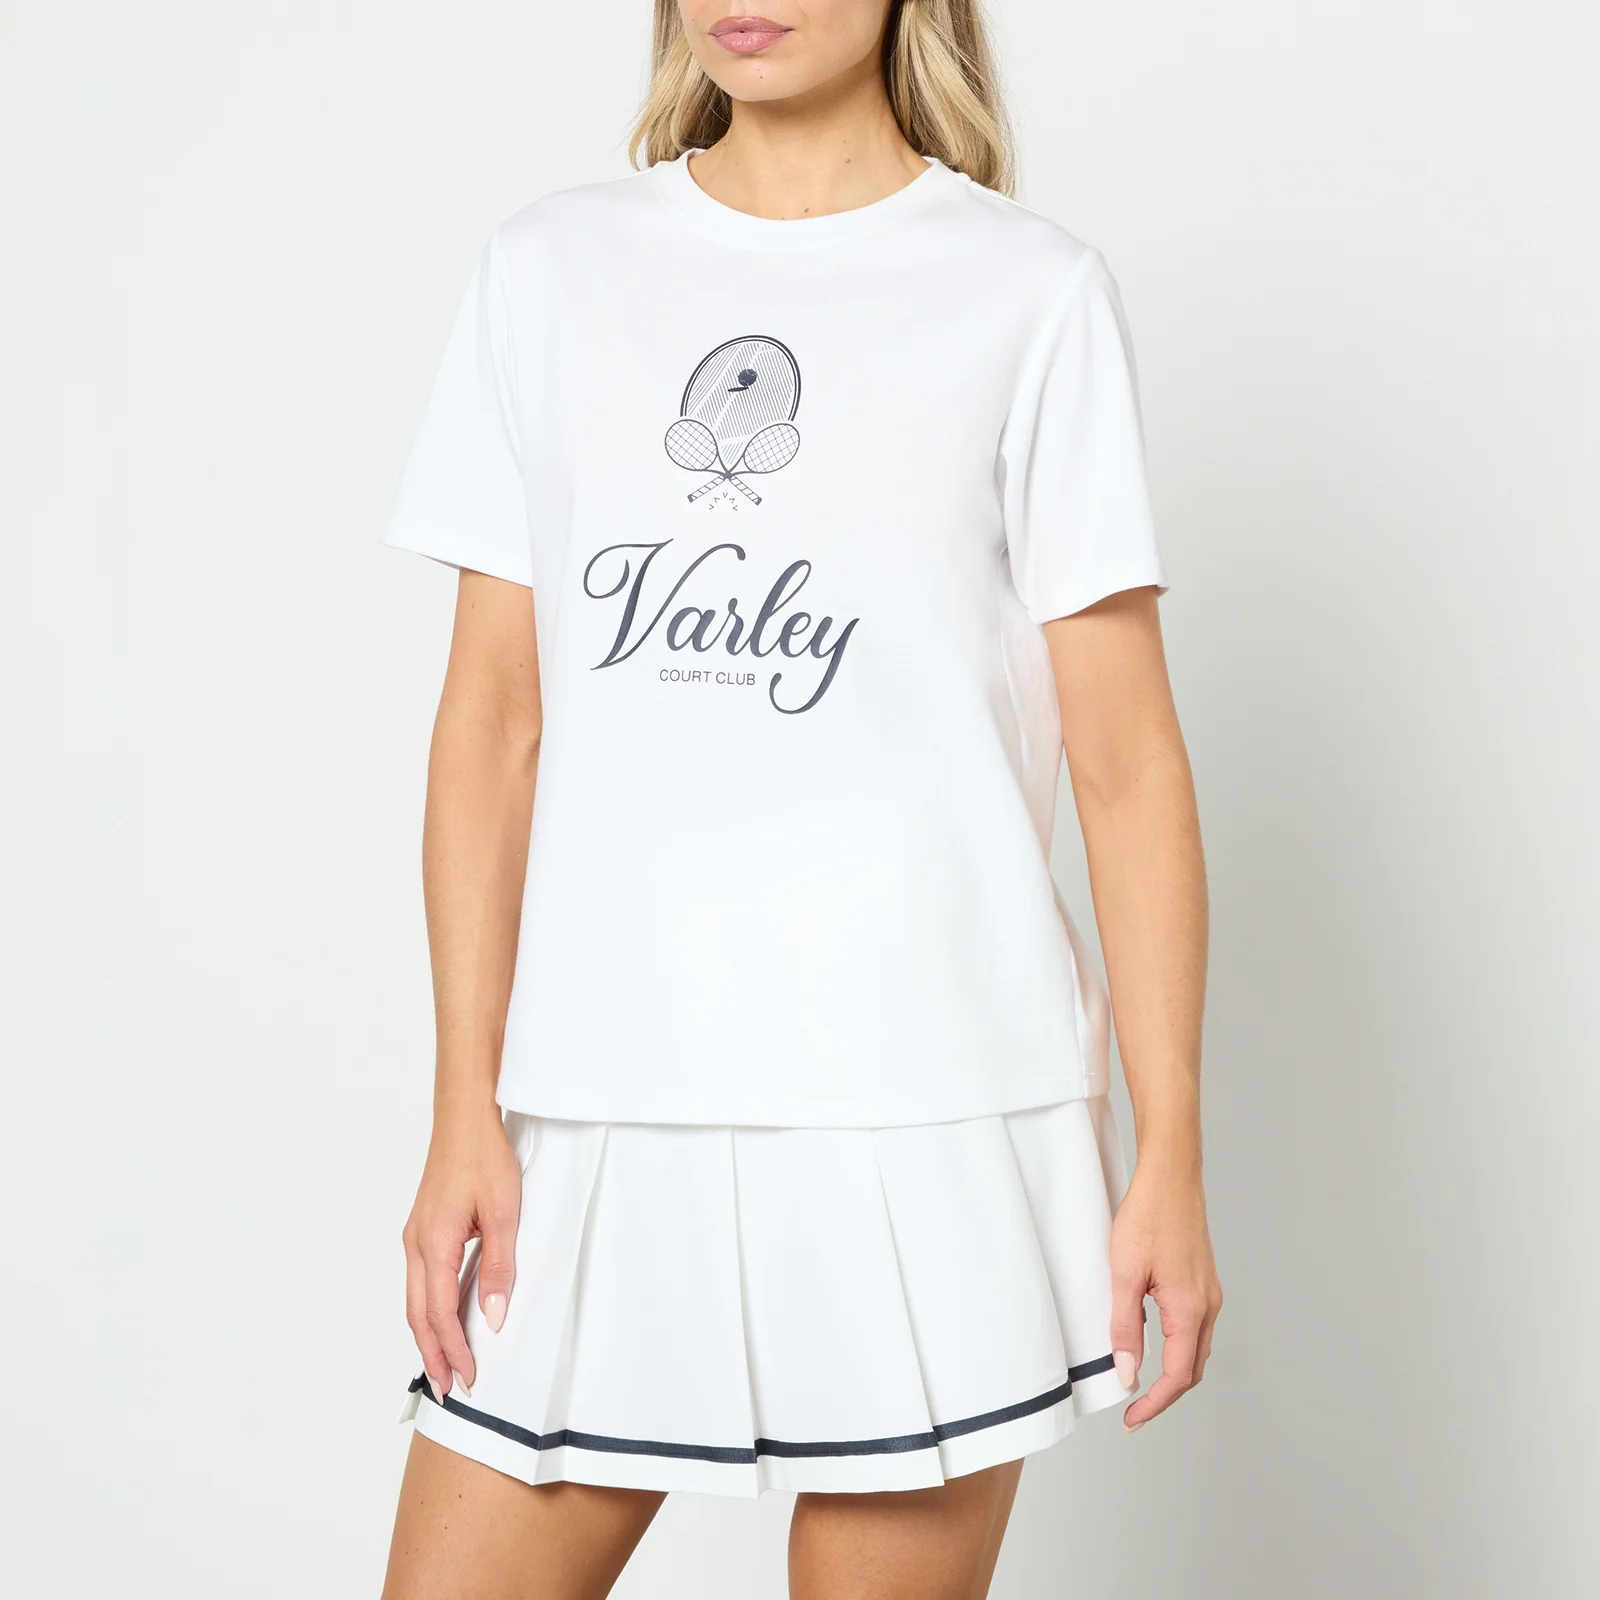 Varley Coventry Branded Jersey Tee - XS Image 1